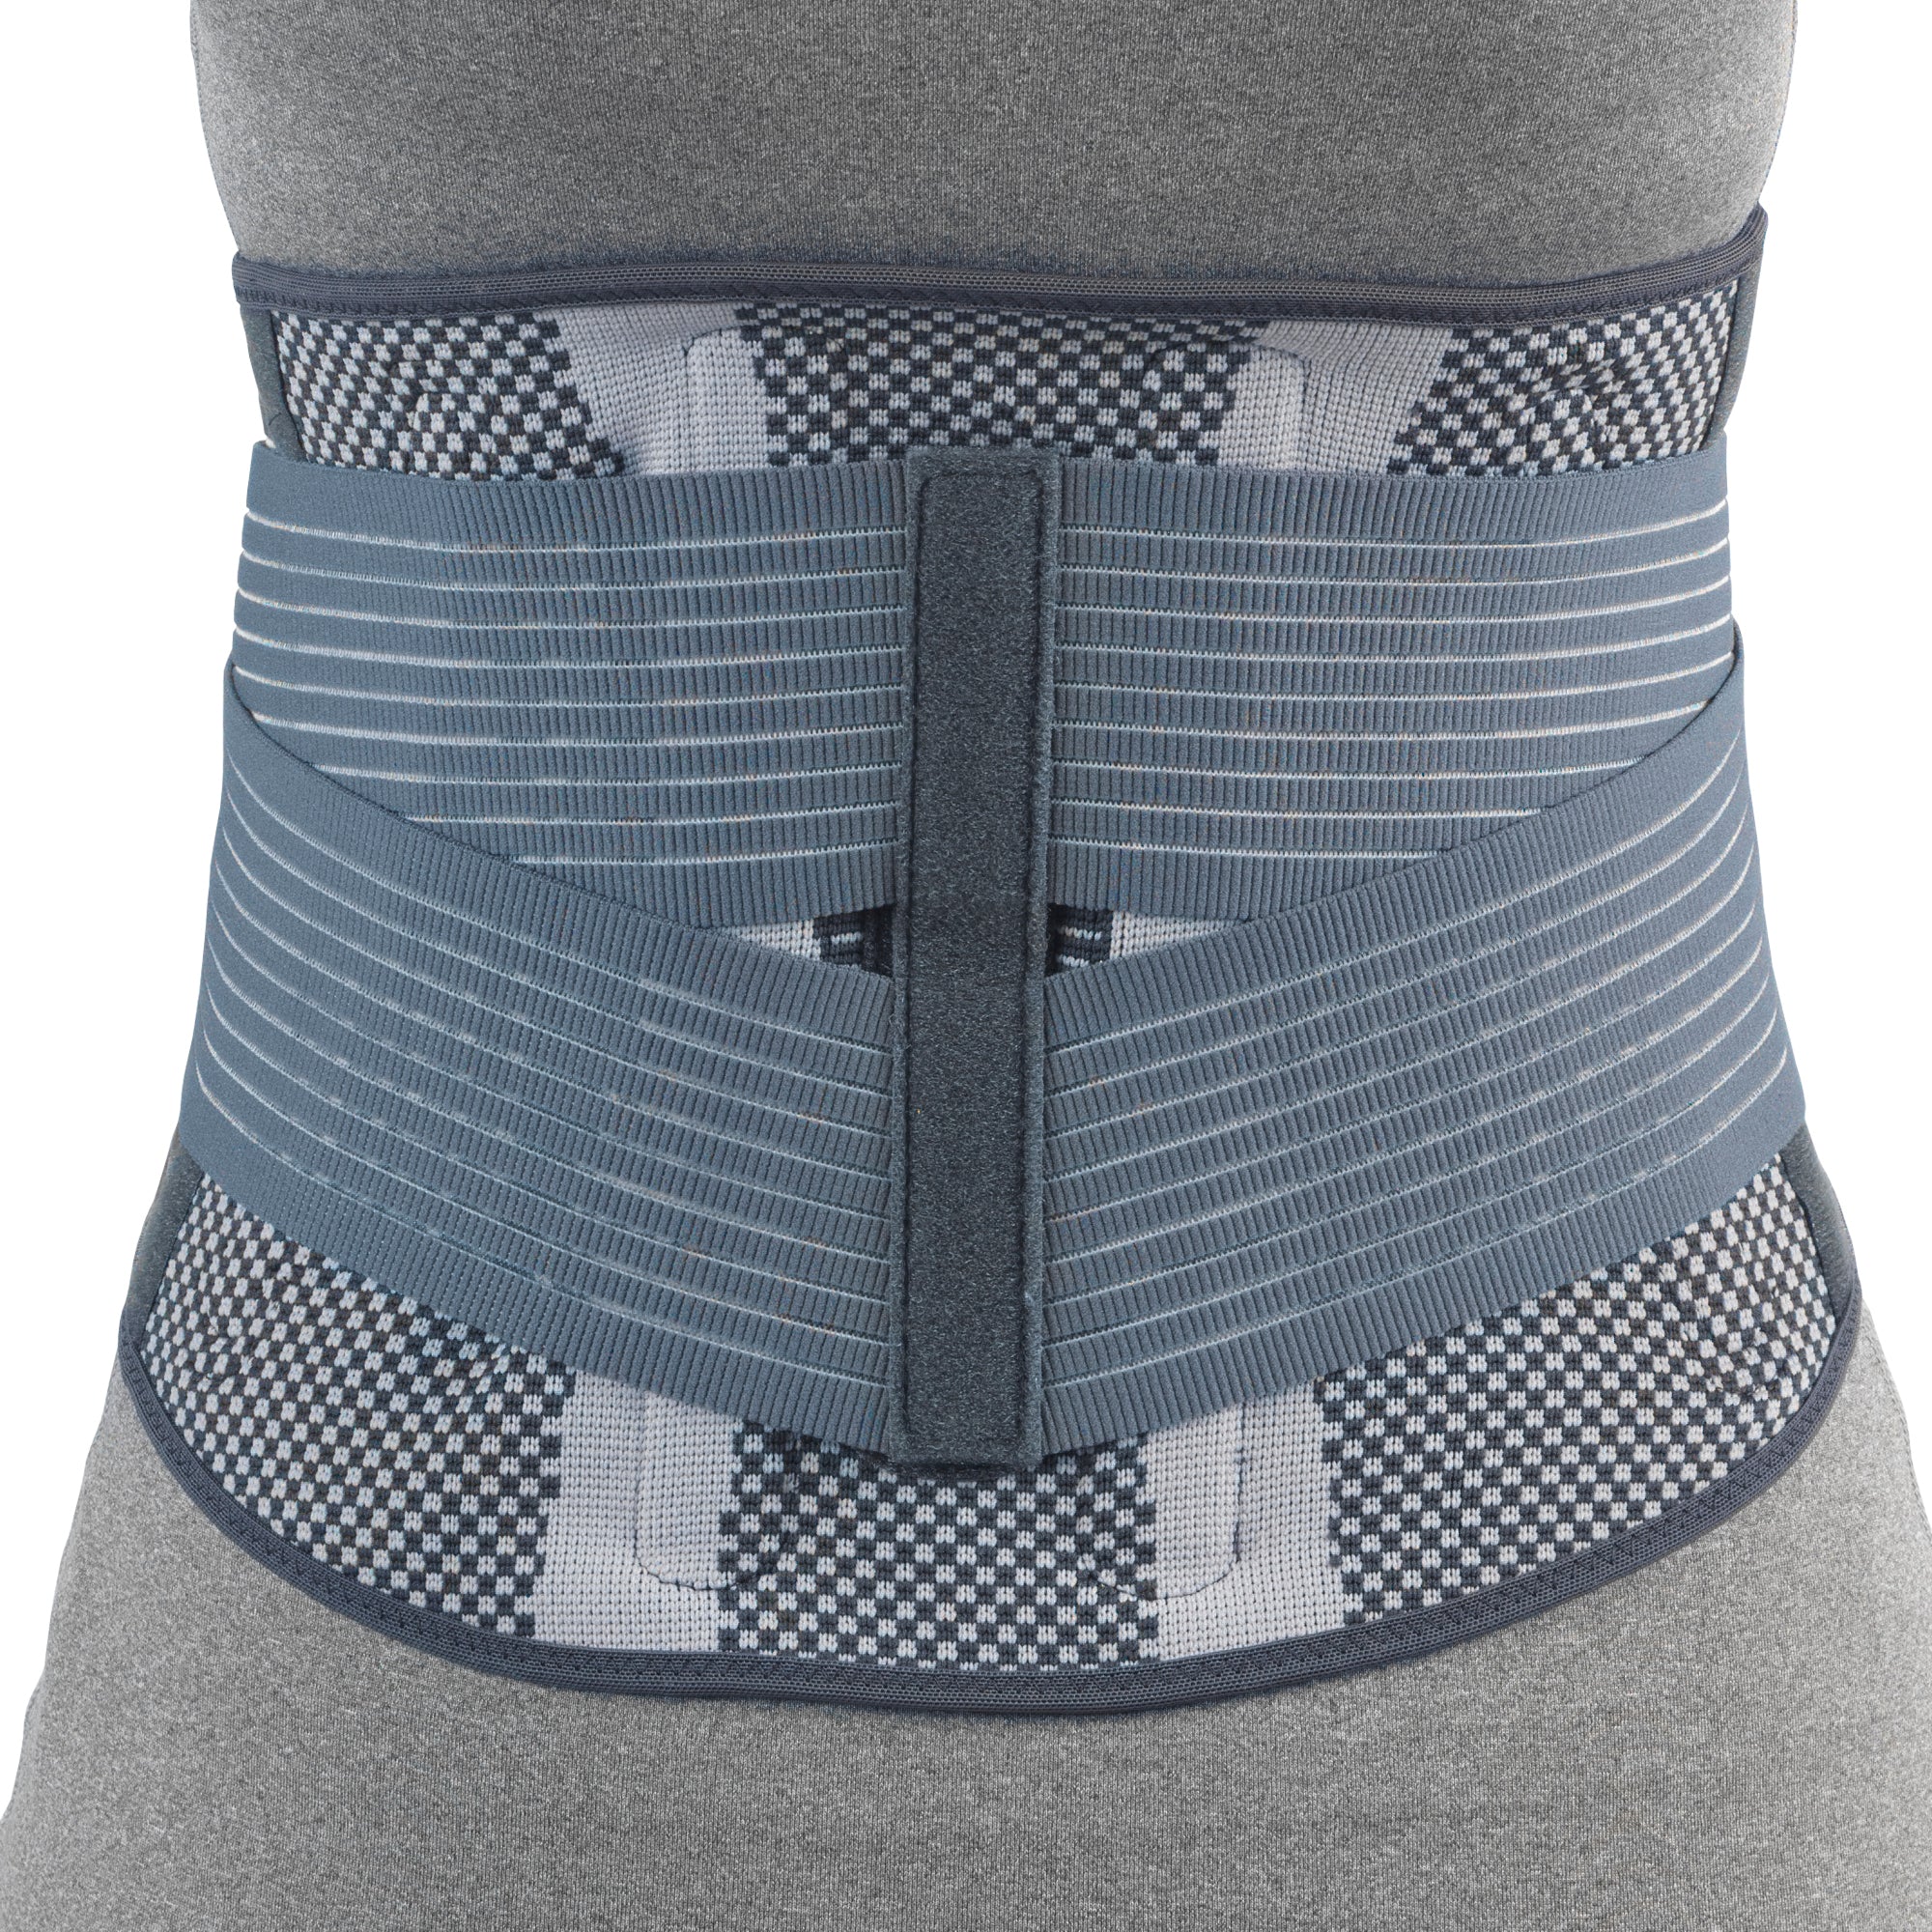 --Rear view of THERATEX LUMBOSACRAL SUPPORT--